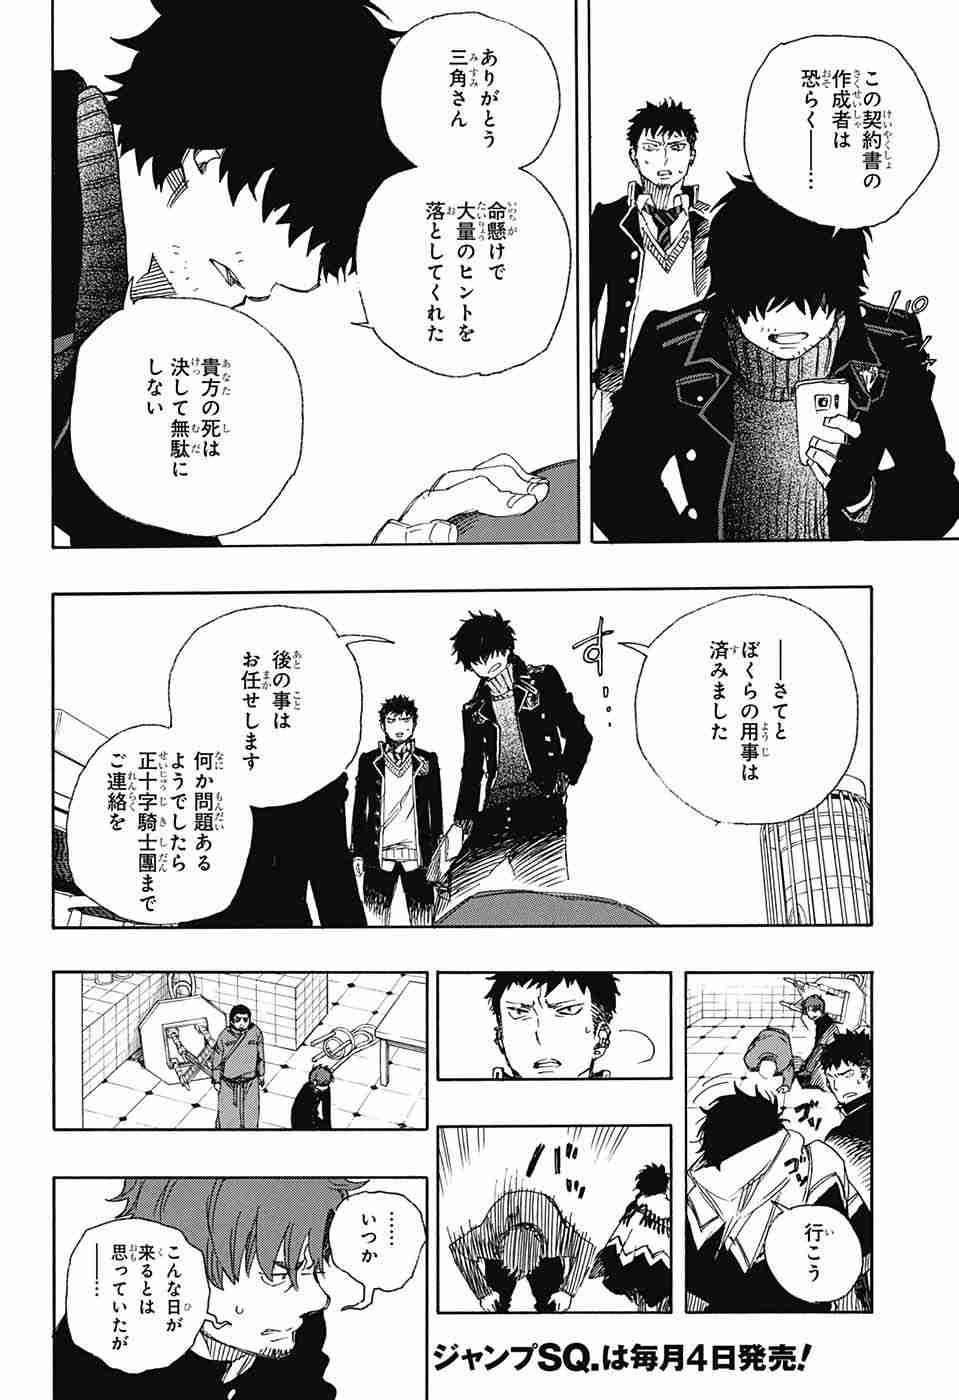 Ao no Exorcist - Chapter 83 - Page 34